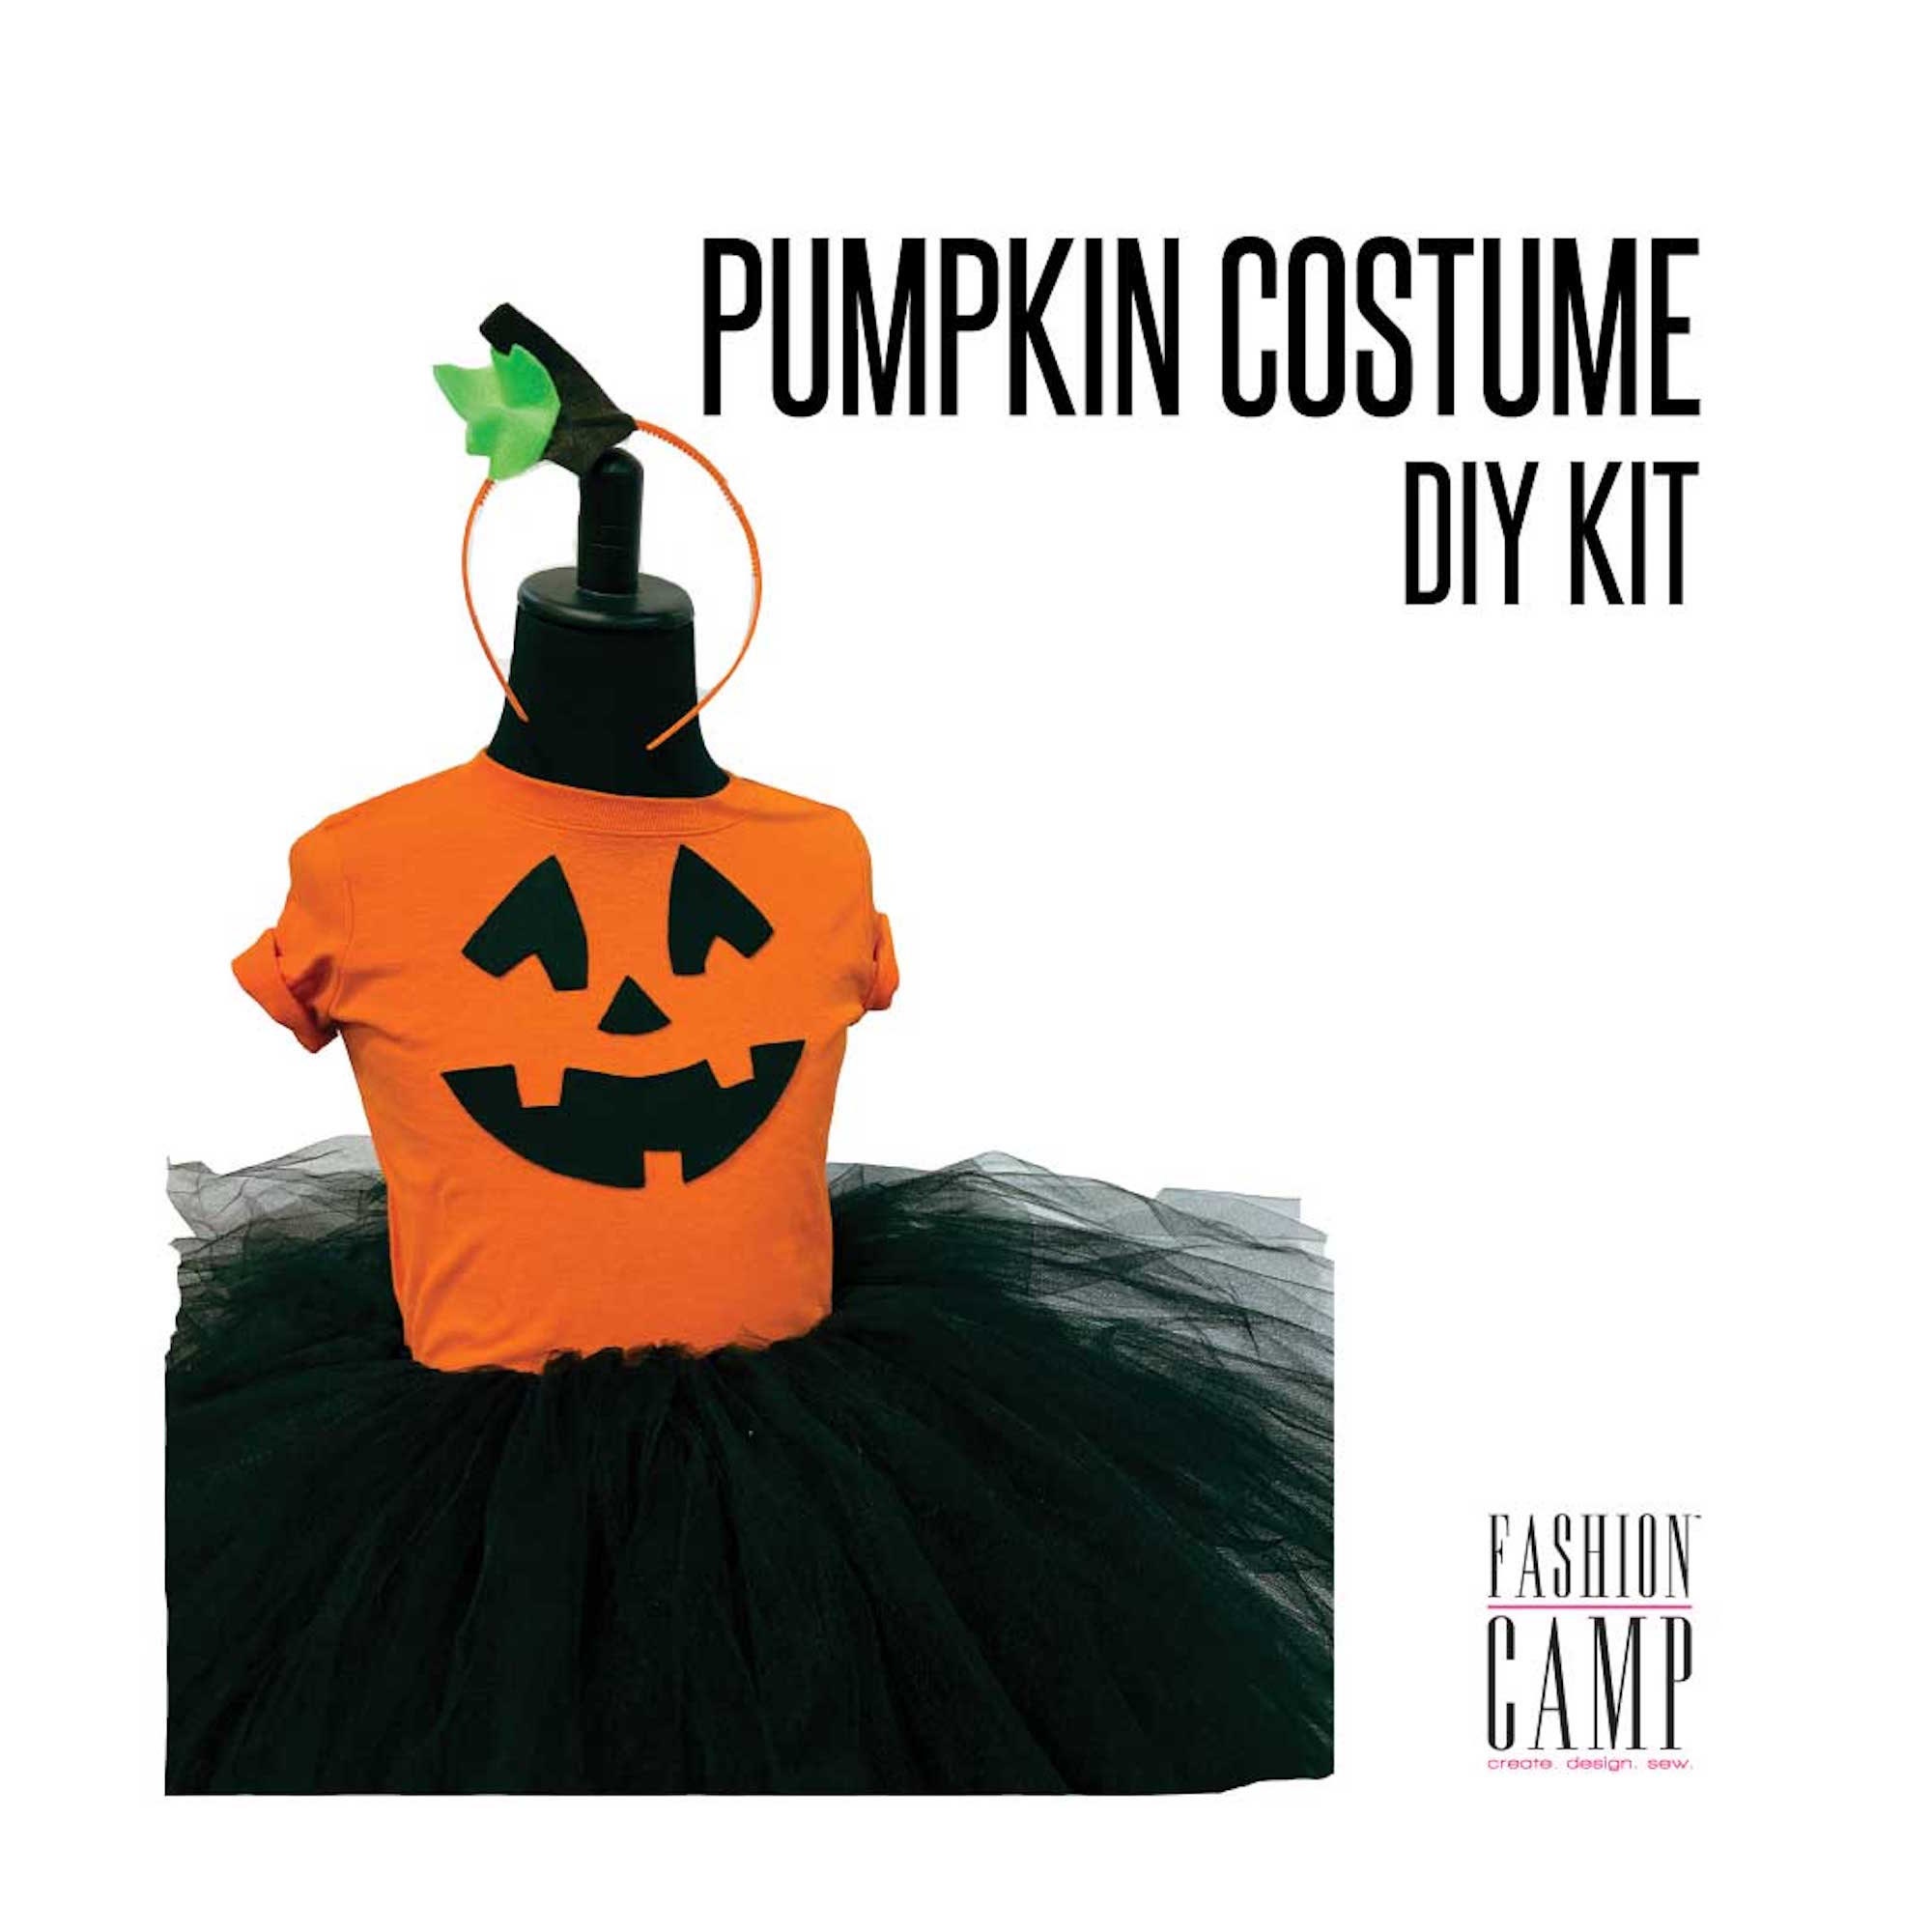 designing homemade pumkin costume for adult Porn Photos Hd